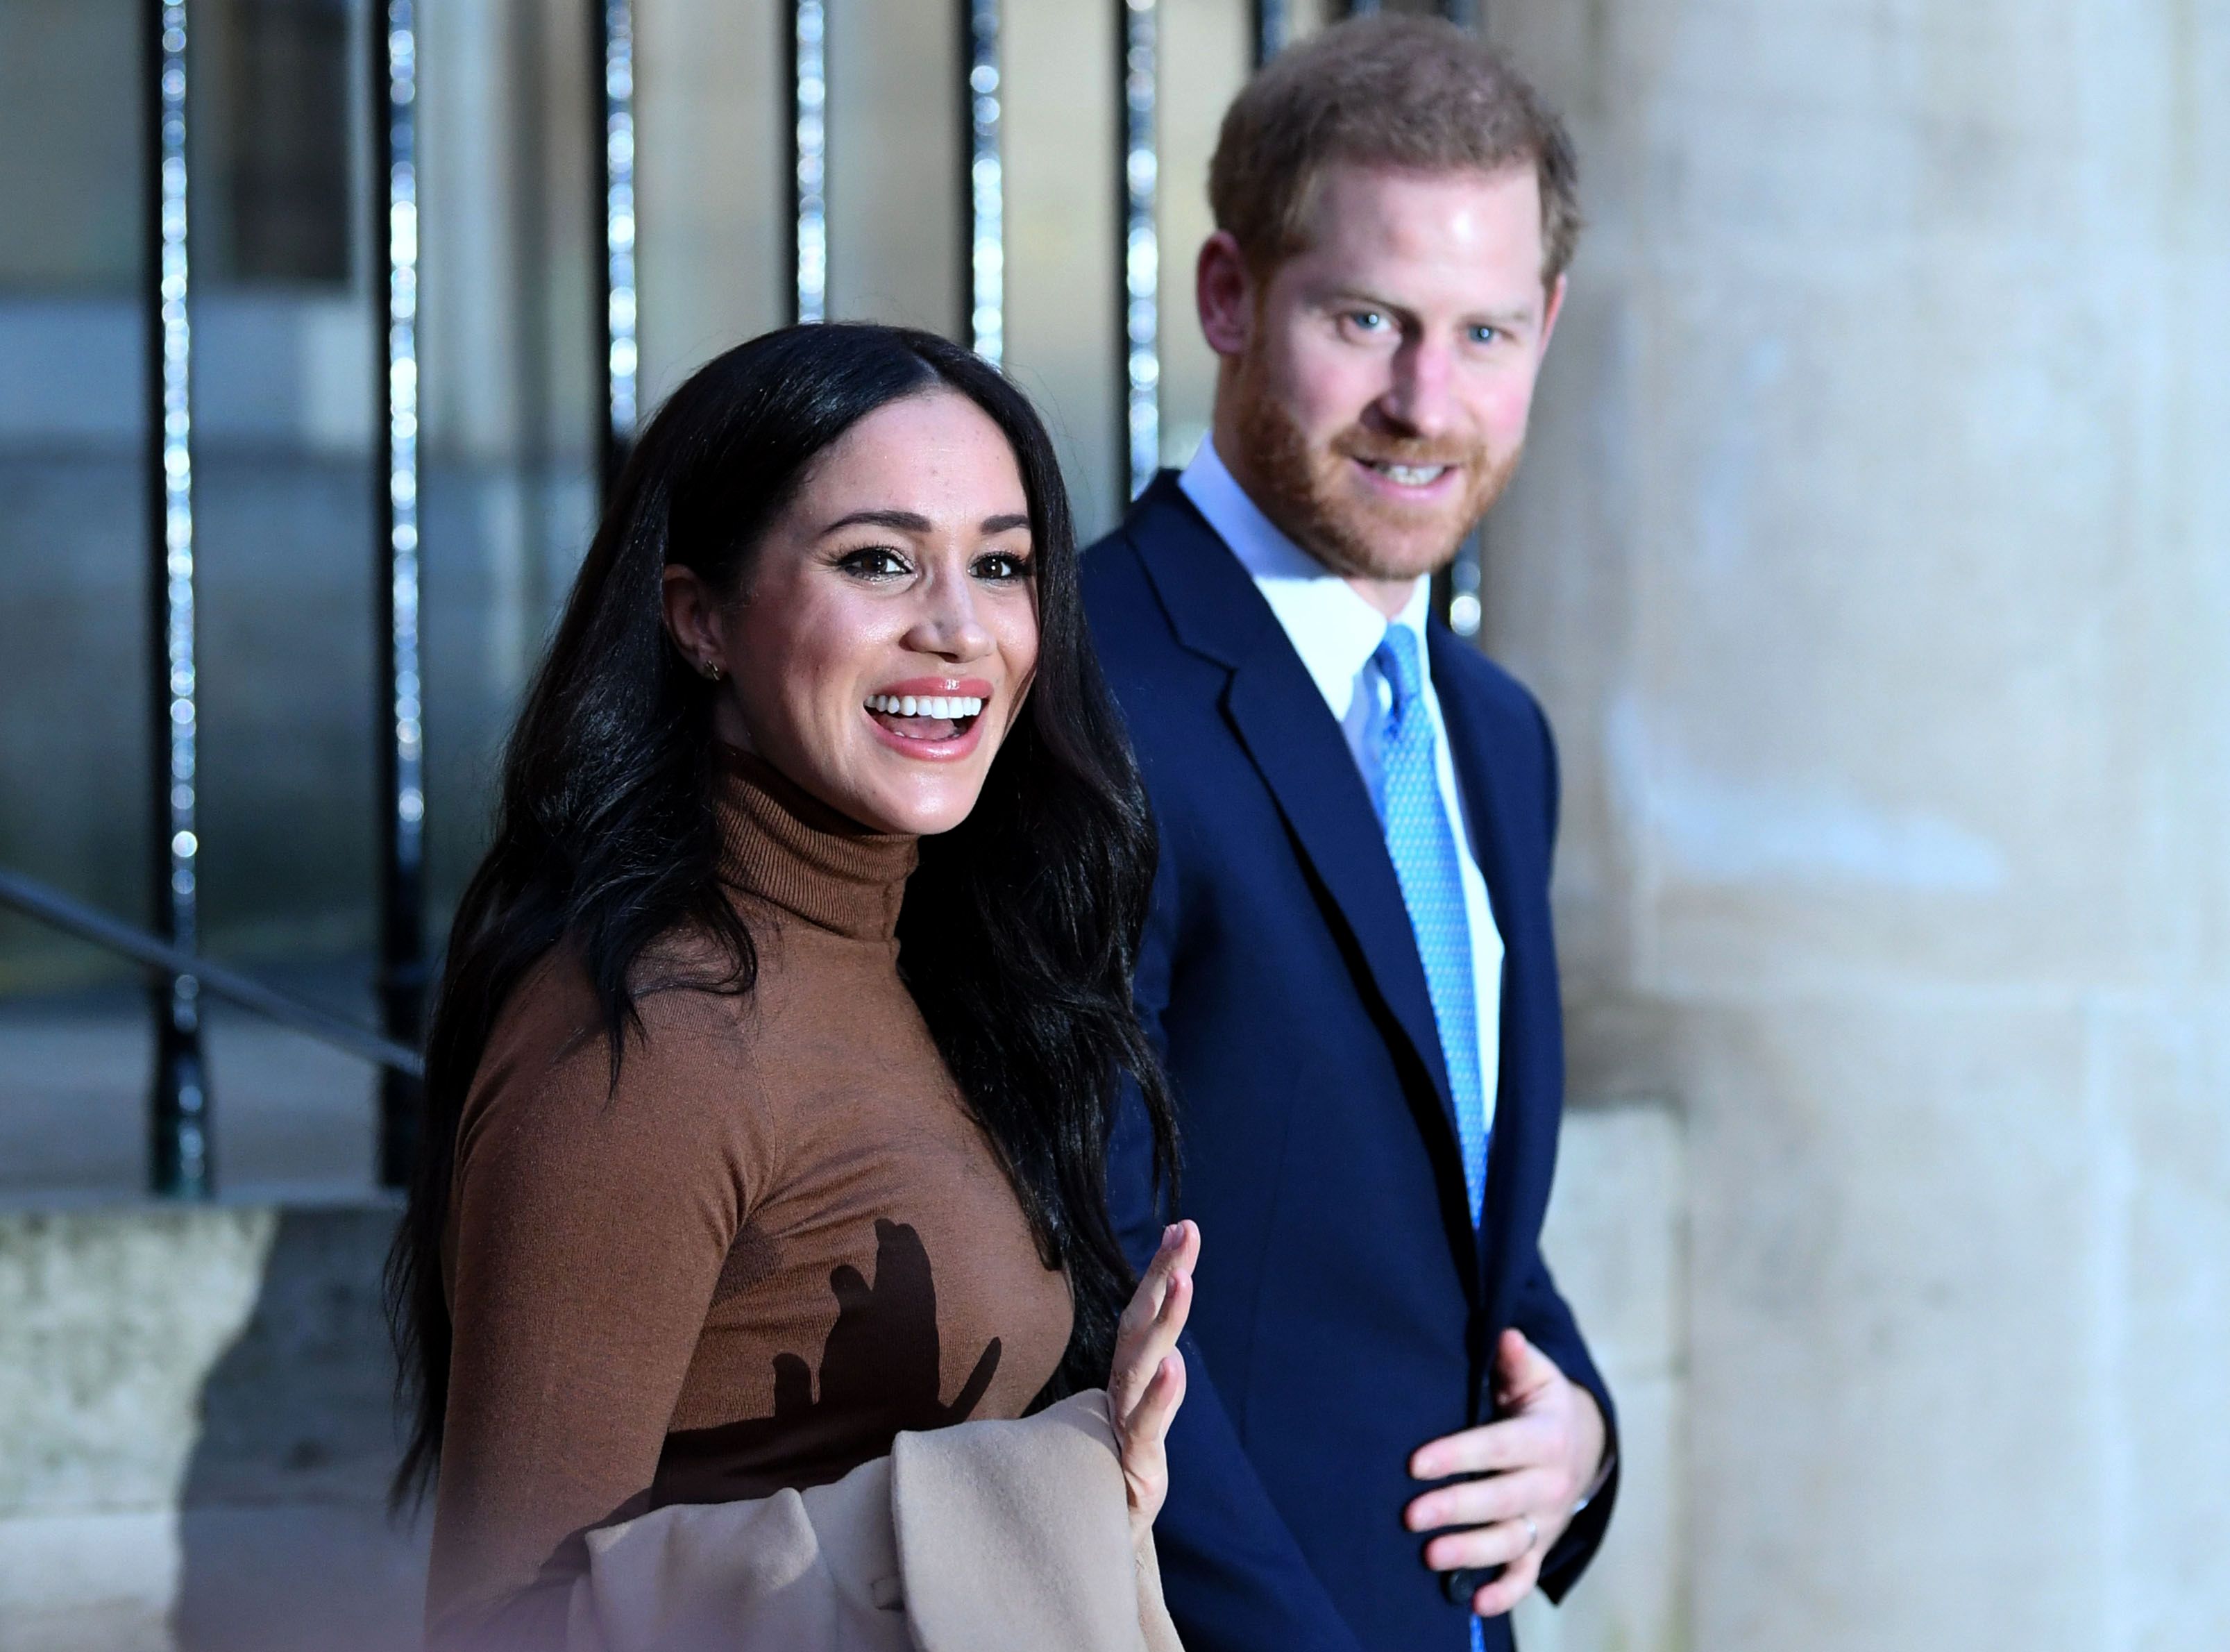 Prince Harry and Meghan Markle react after their visit to Canada House in thanks for the warm Canadian hospitality and support they received during their recent stay in Canada, on January 7, 2020 | Source: Getty Images